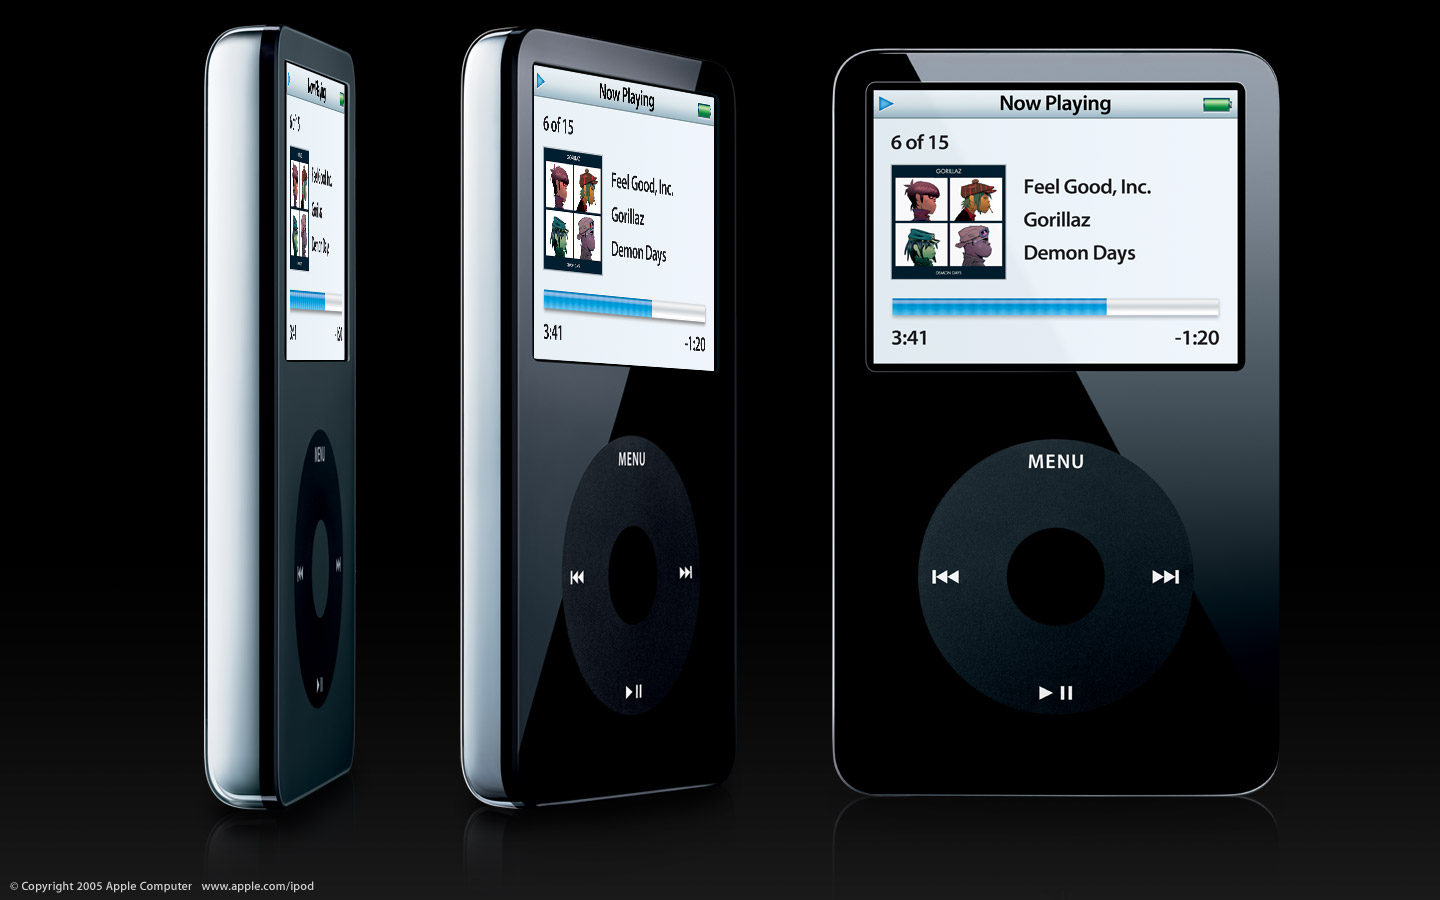 download the last version for ipod Class of 